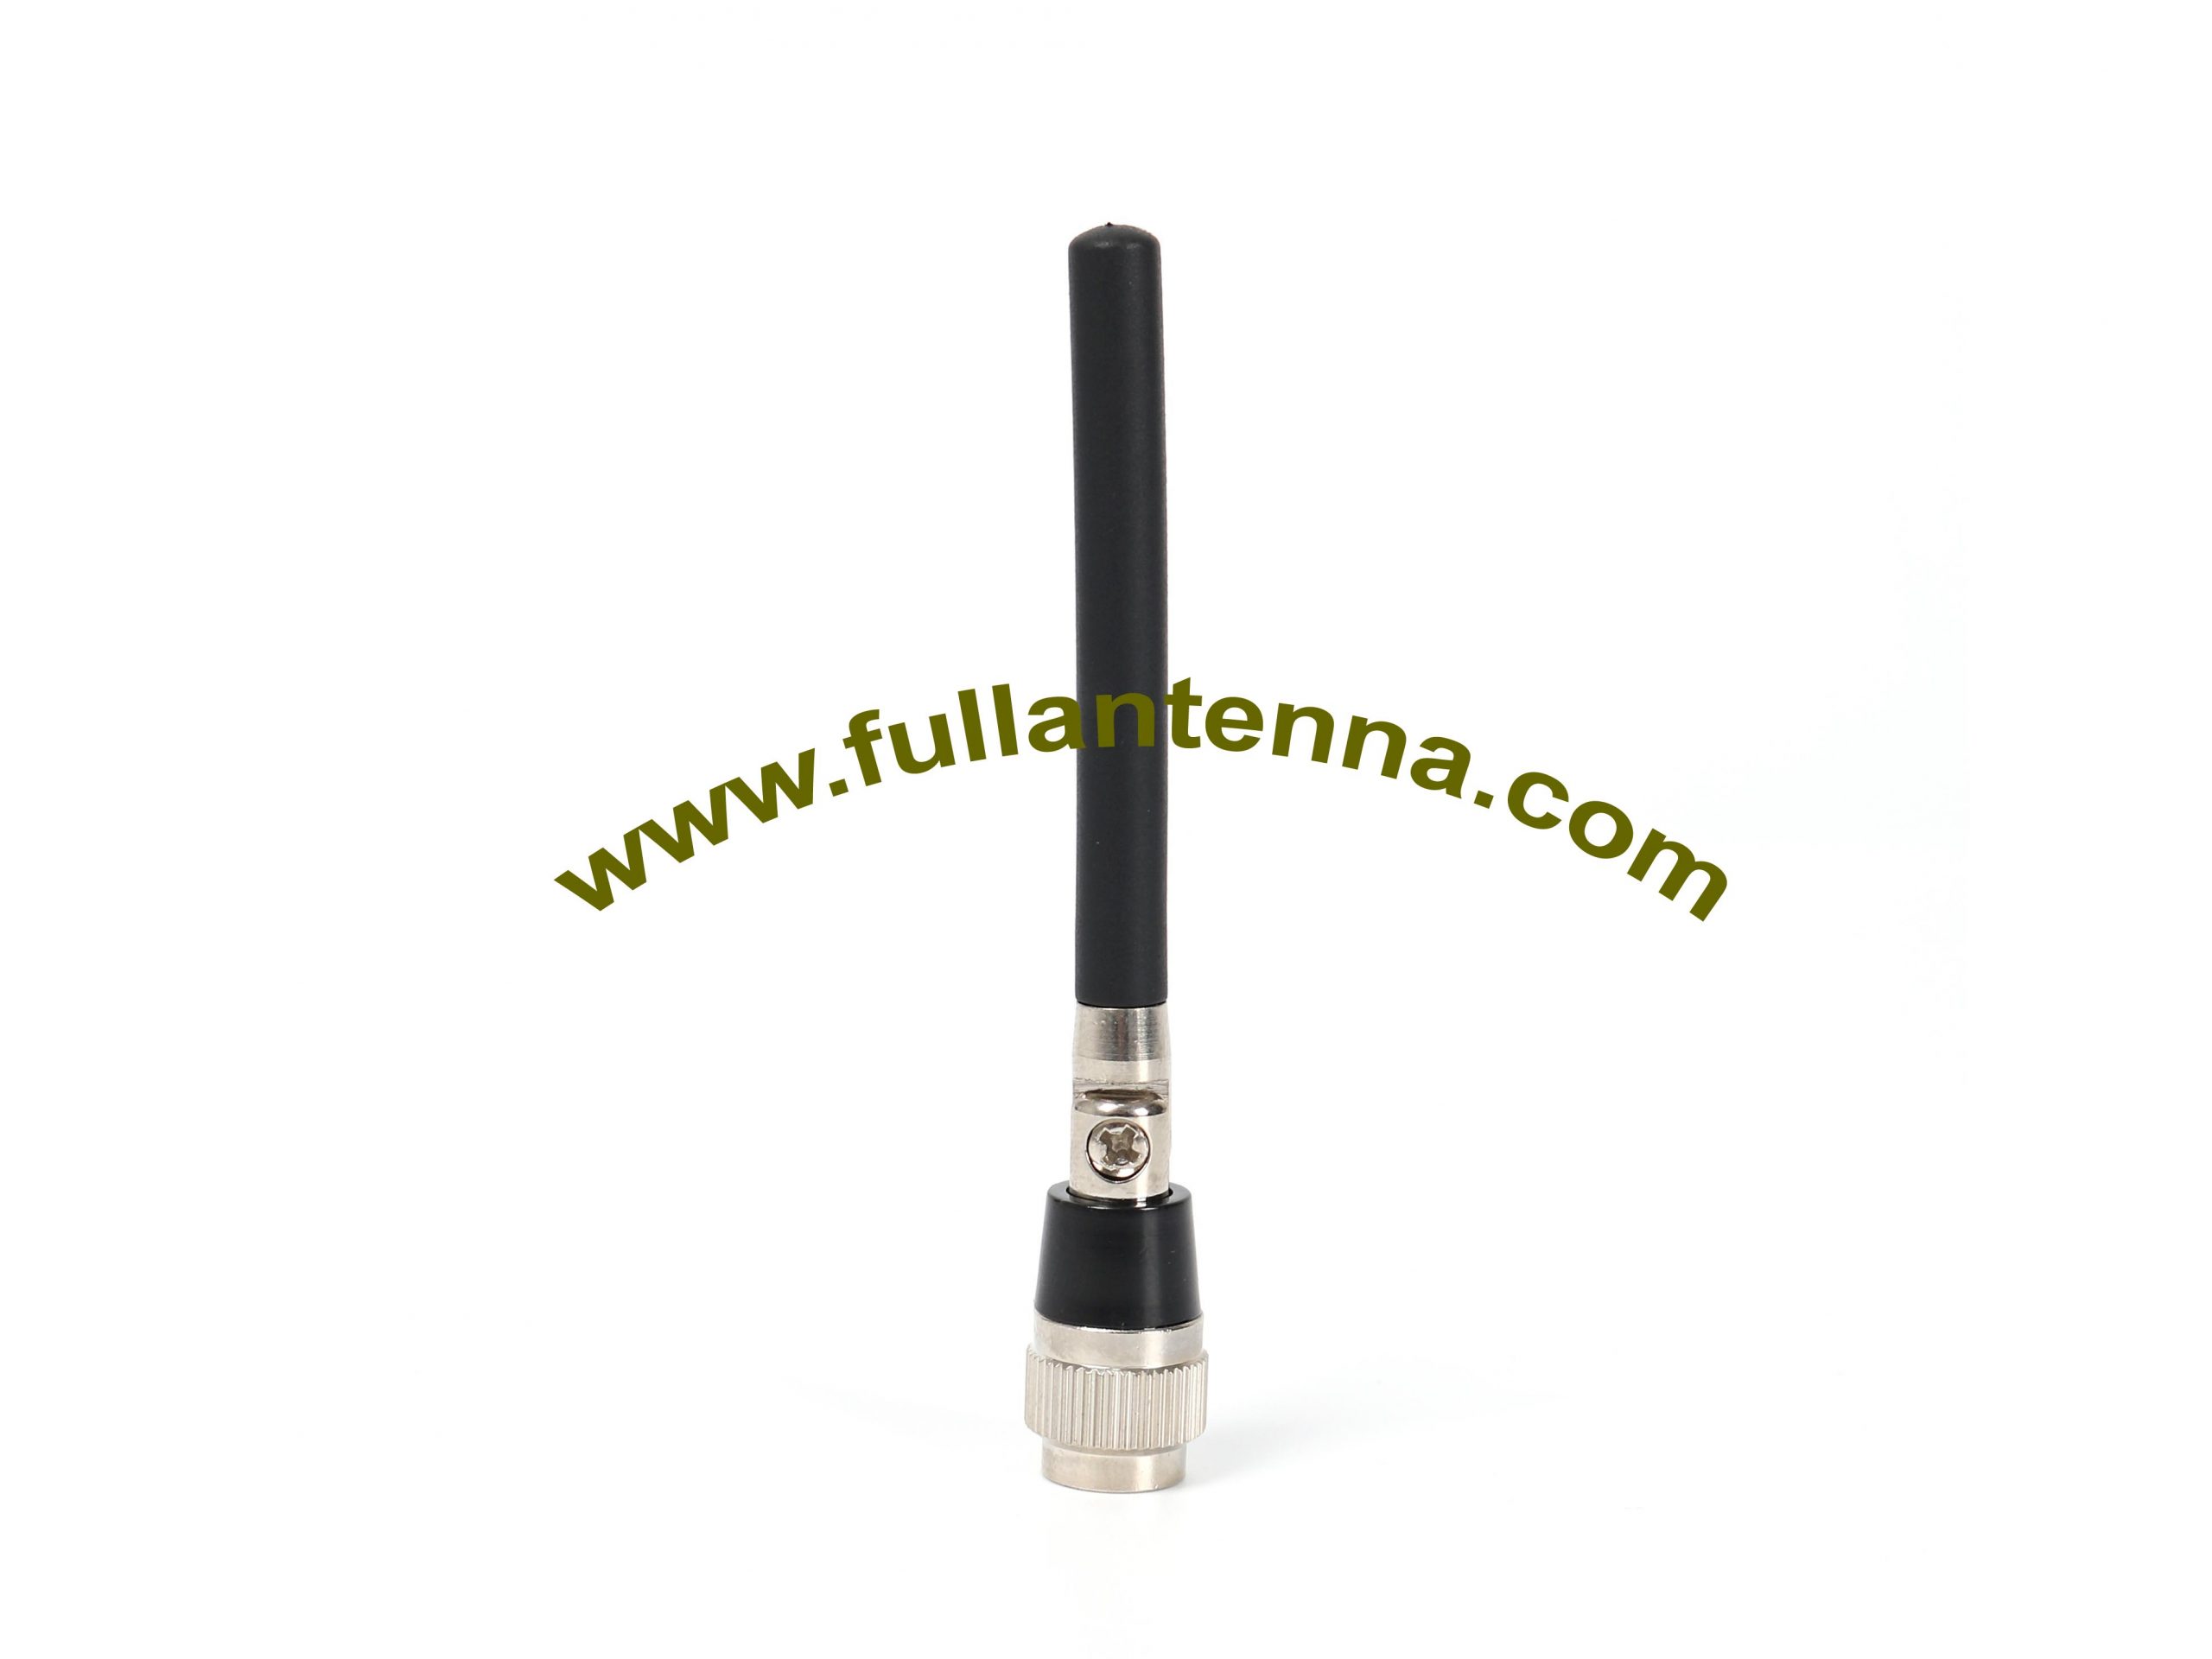 P/N:FA3G.0105,3G Rubber Antenna,3G antenna,850,900,1800,1900,2100mhz frequency,short small size